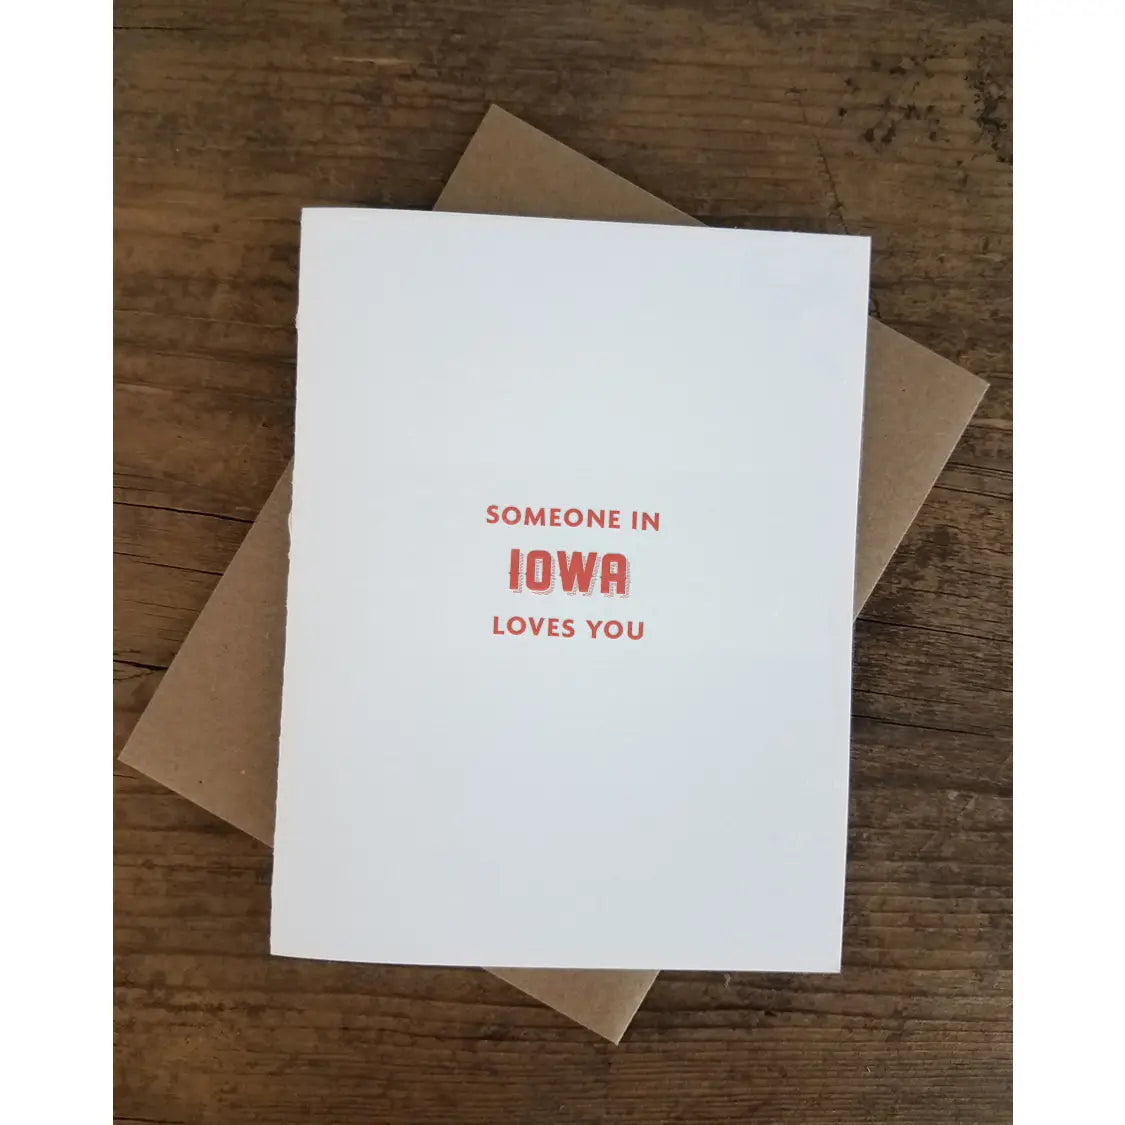 White card with red text reading "someone in Iowa loves you"